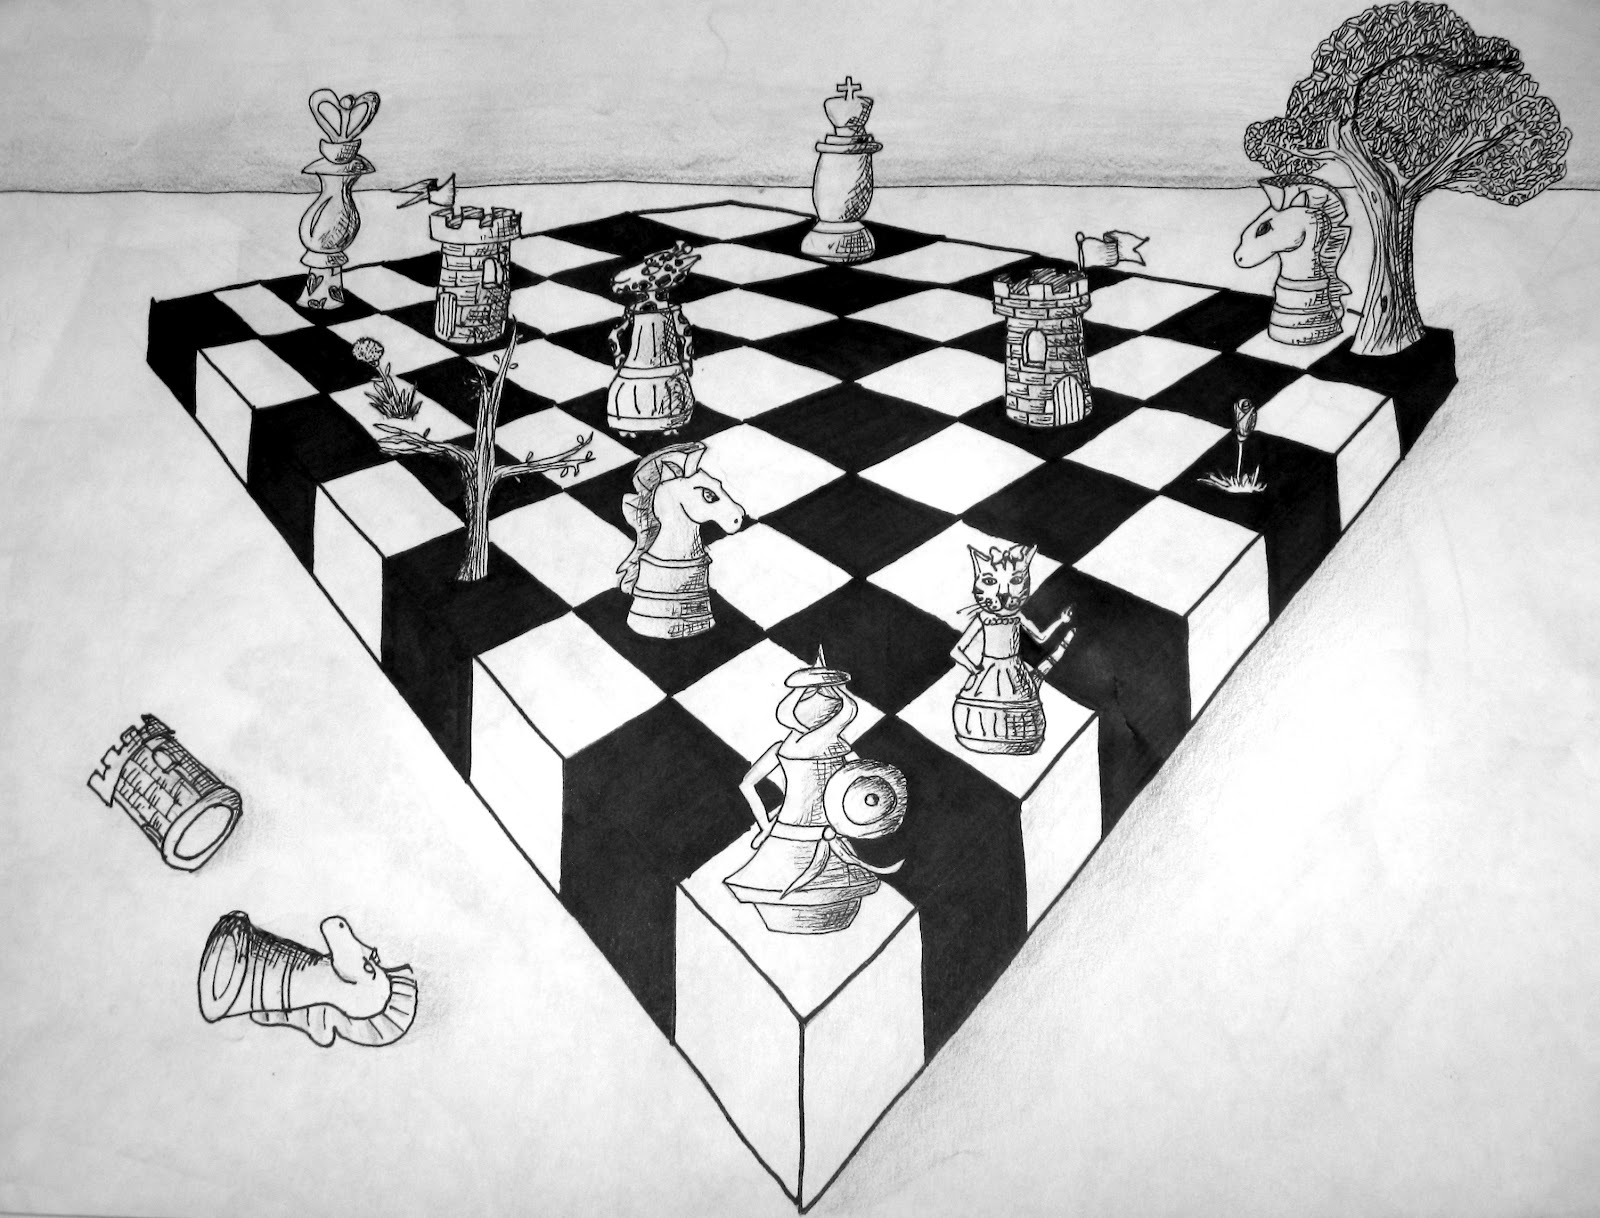 Draw a chessboard in perspective view, using straightedge only